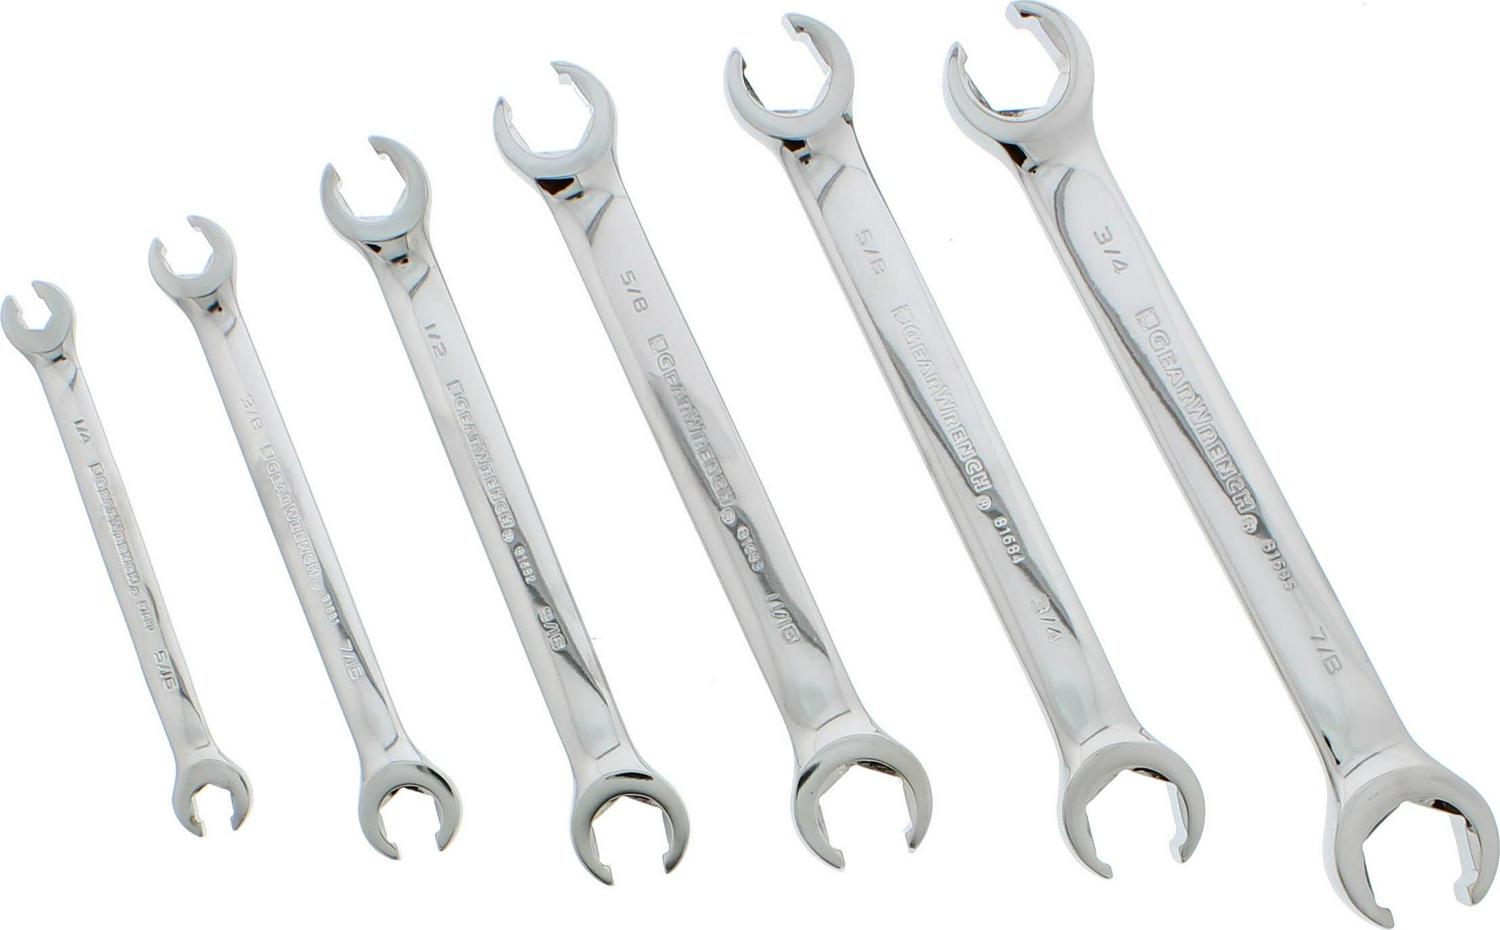 6 Piece SAE Flare Nut Wrench Set